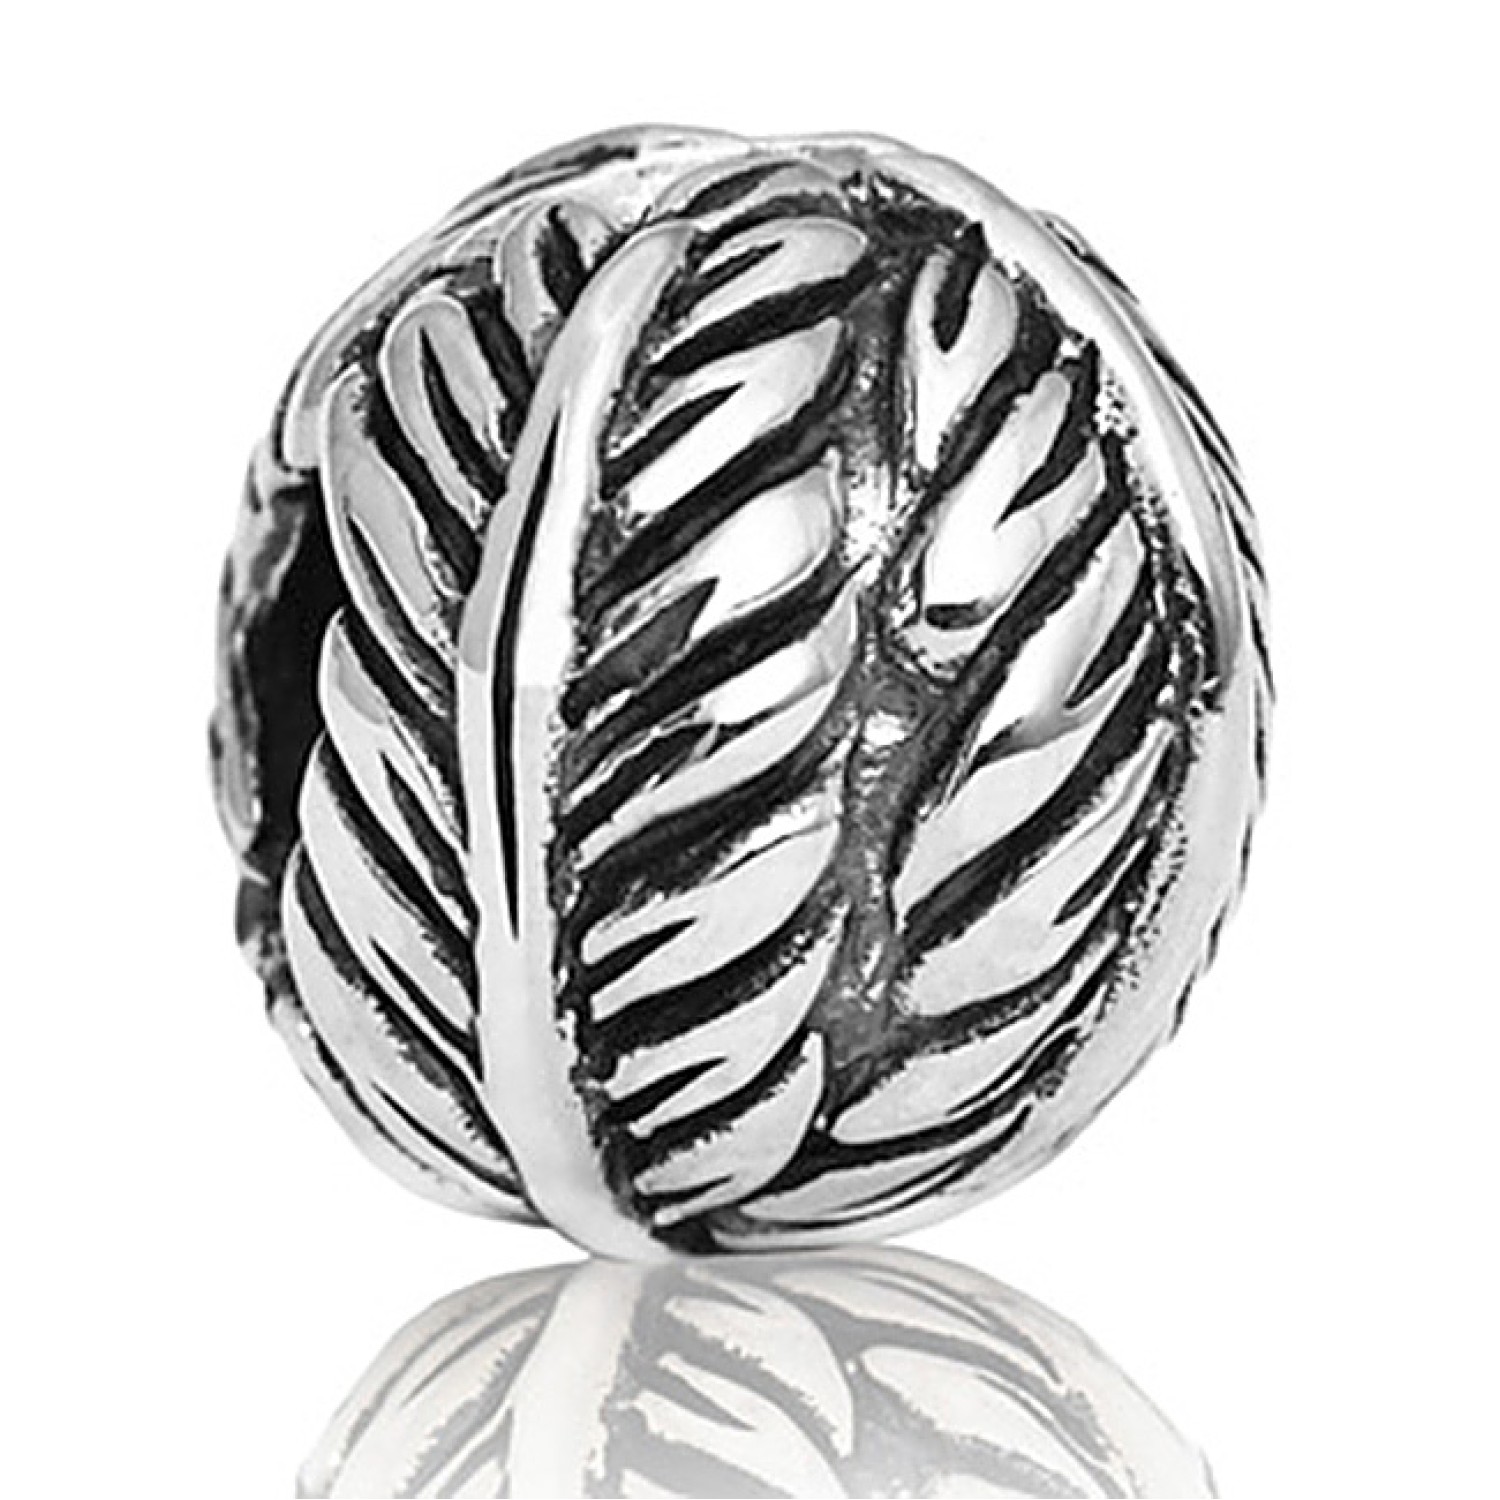 LKC018 Evolve Charms Friendship Fern End Stopper. Evolves beautiful Friendship Fern represents the unique bonds we have with those closest to us, celebrating special memories made together. Four fern leaves join to create a strong & beautiful whole, s